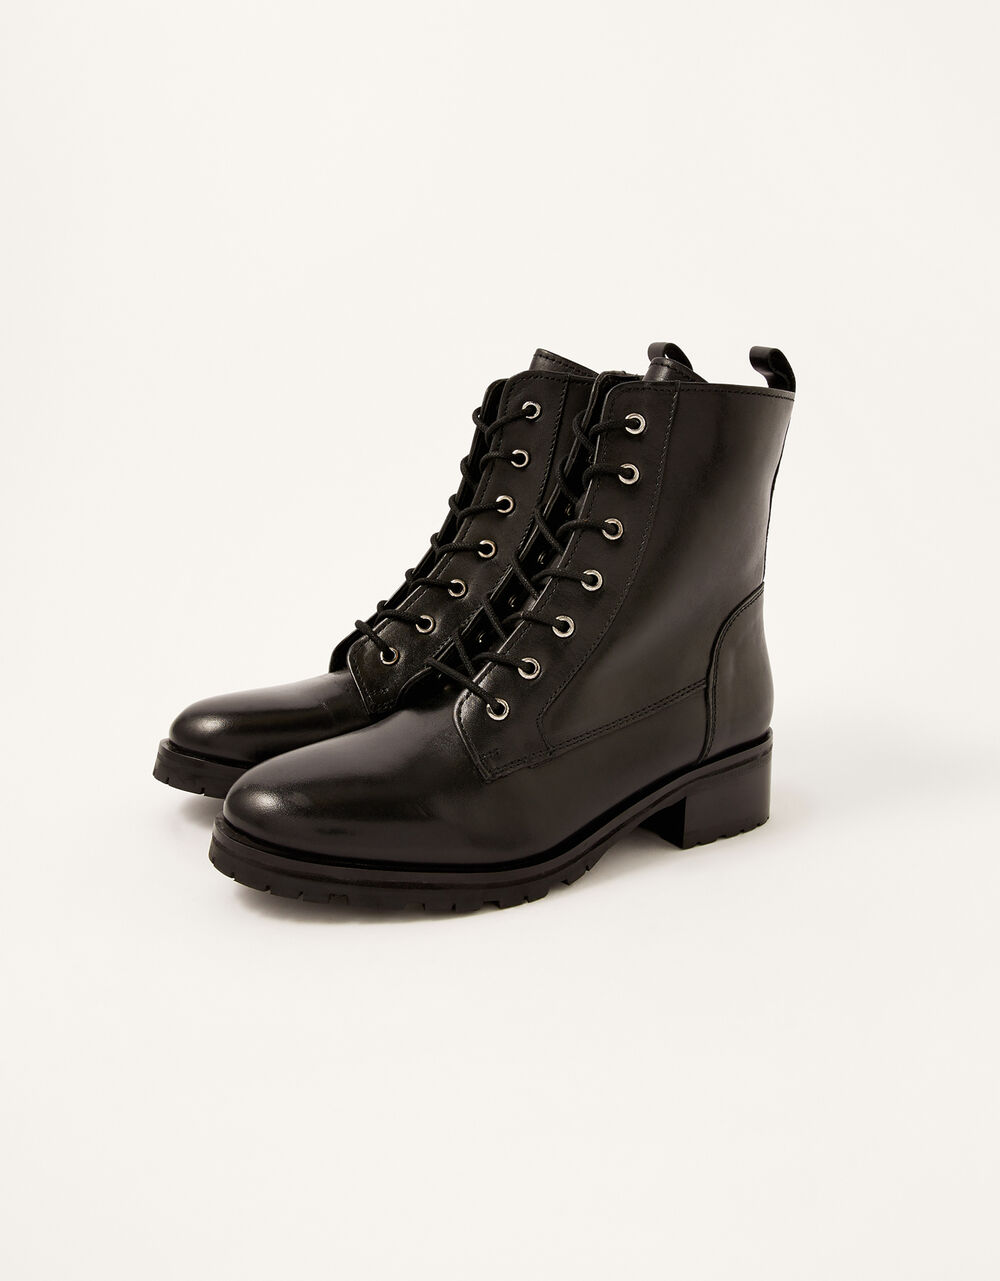 Letty Leather Lace-Up Biker Boots Black | Shoes & Boots | Monsoon UK.